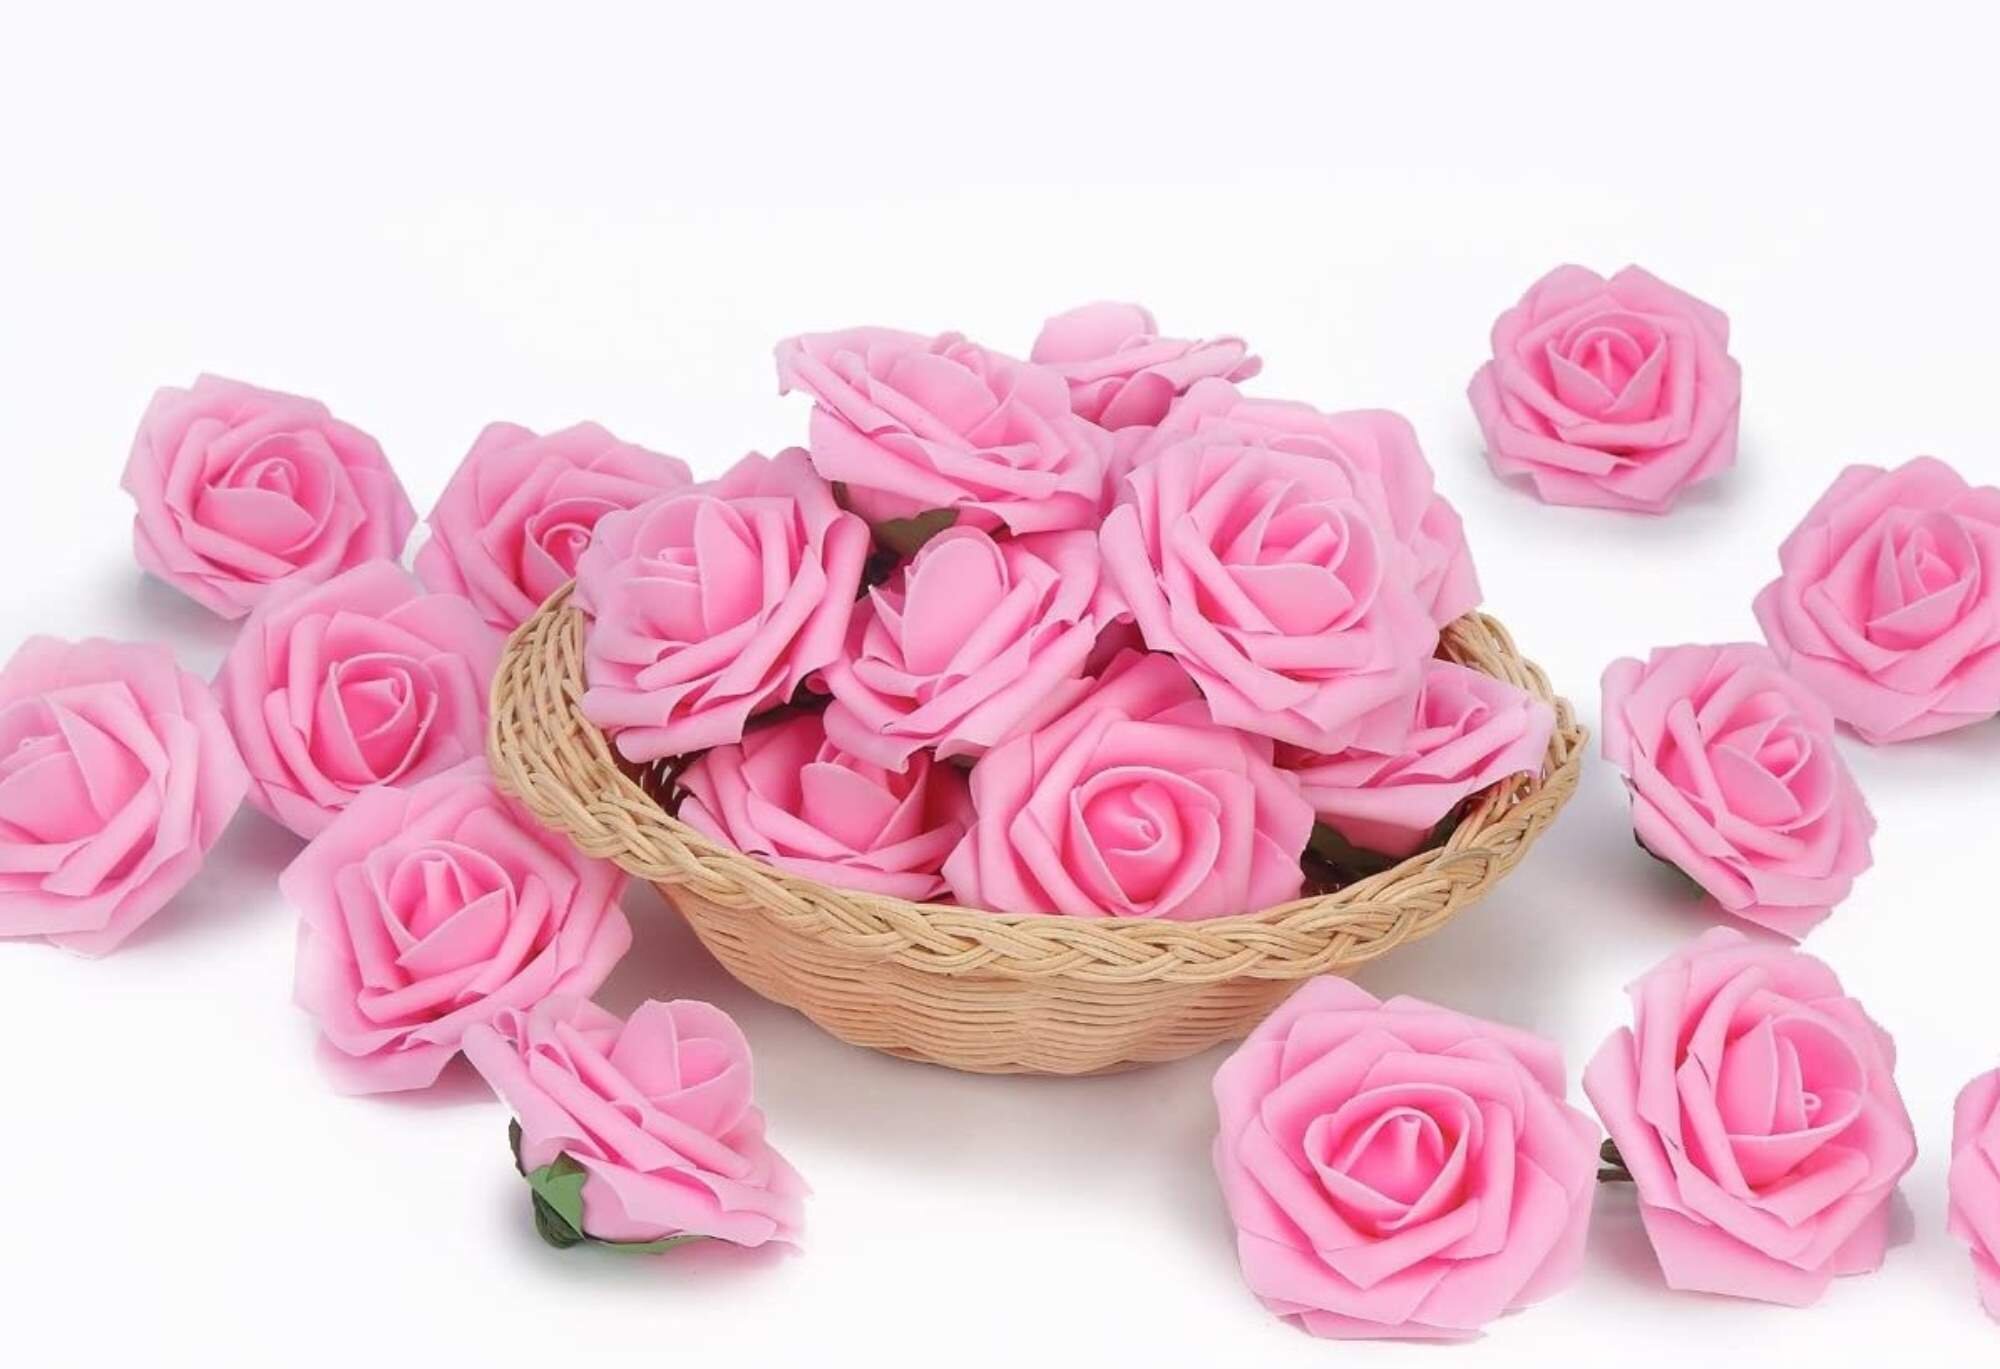 3pcs/Bouquet Romantic Rose Home Decor Artificial Flower Gifts Valentines Day 